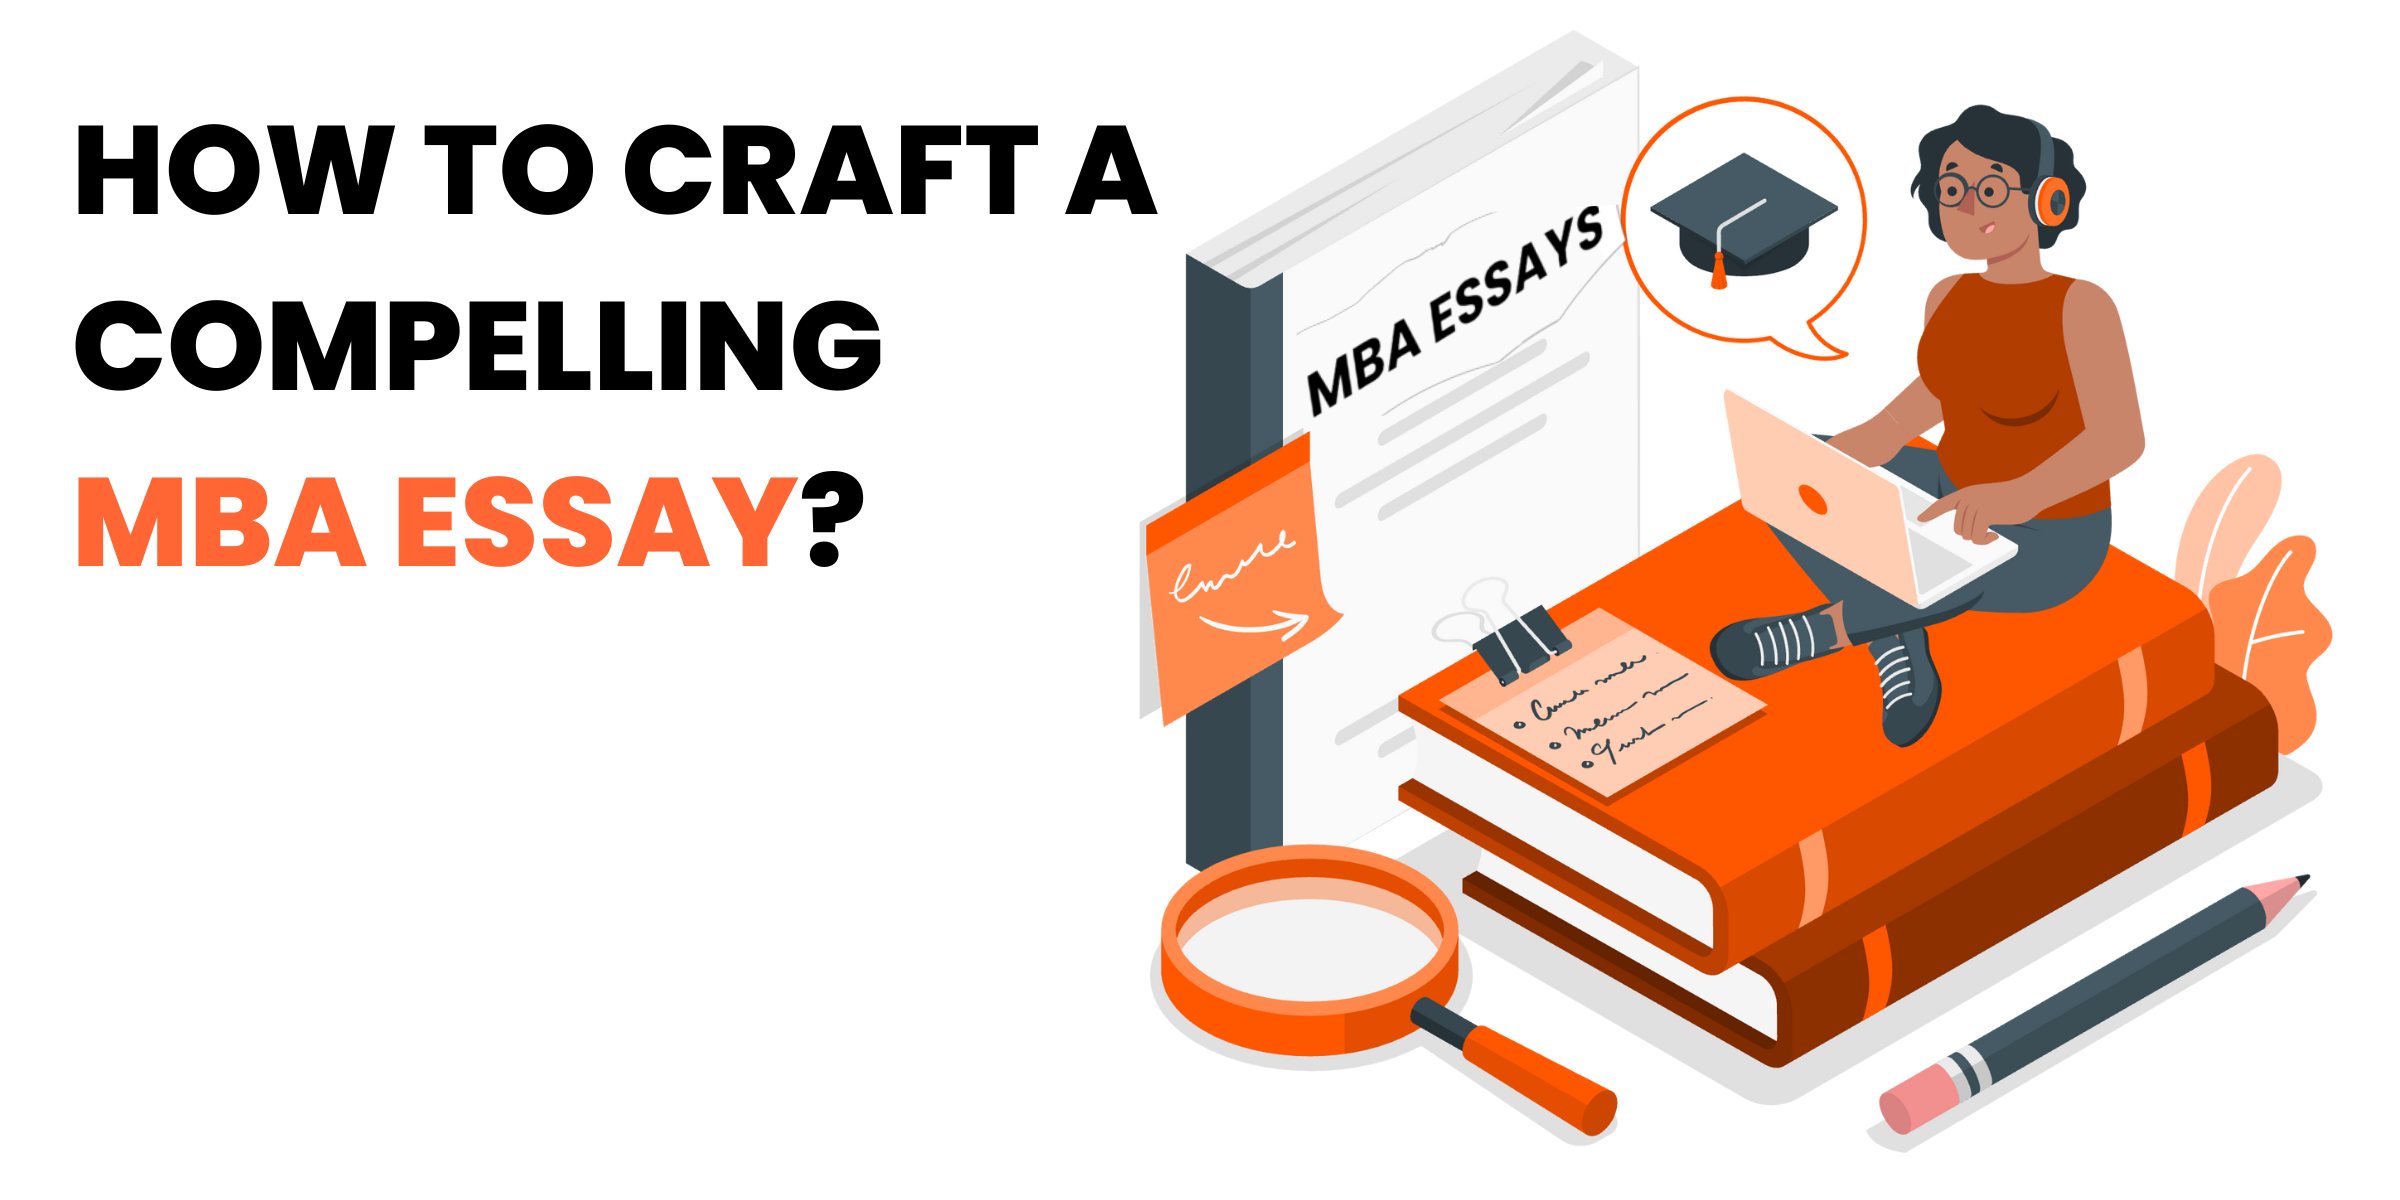 How to craft a compelling MBA Essay?